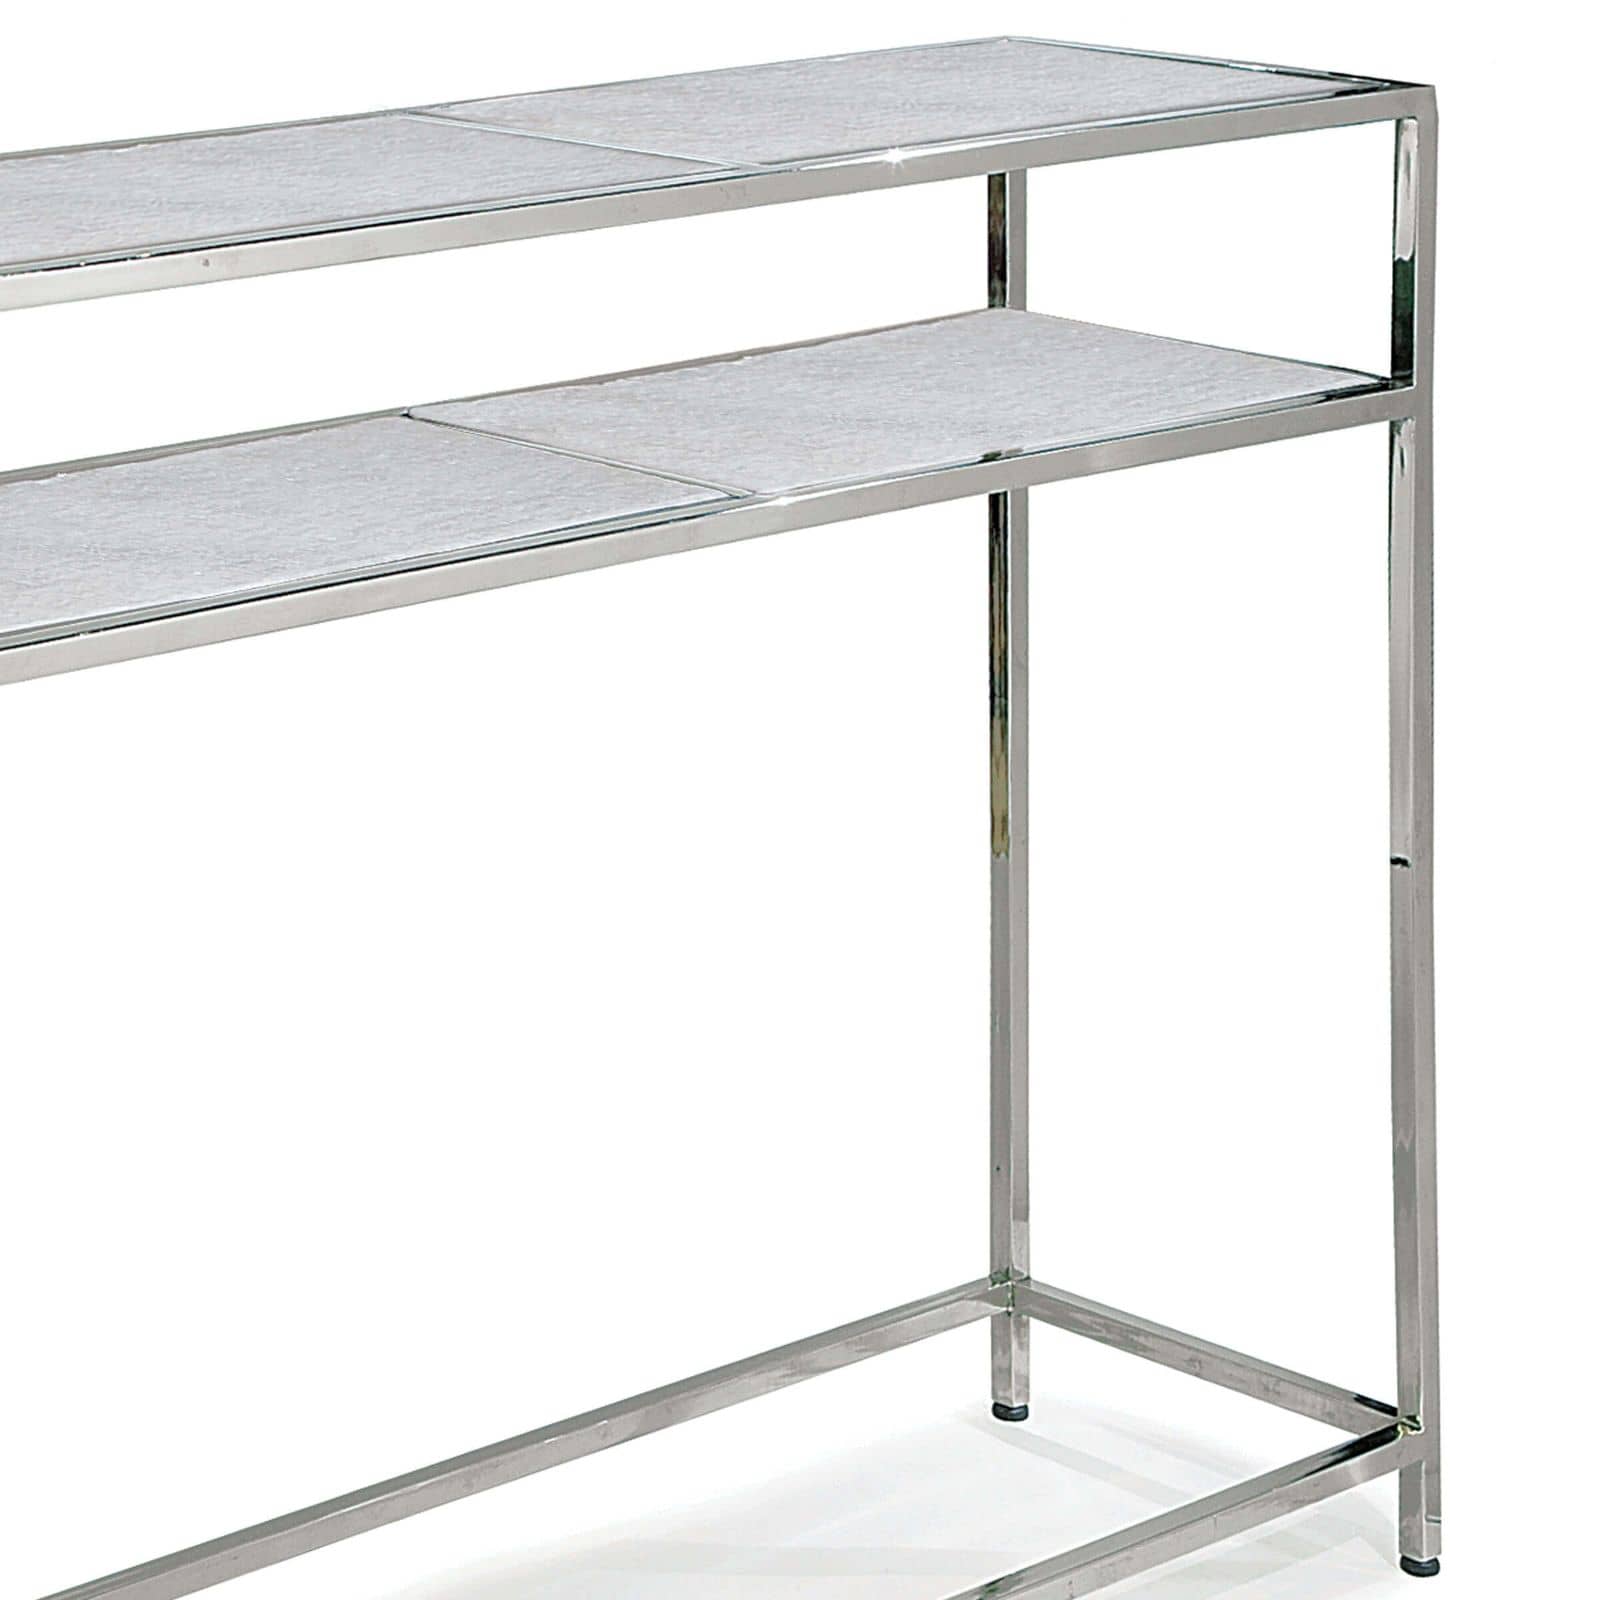 Regina Andrew Echelon Console Table in Polished Nickel